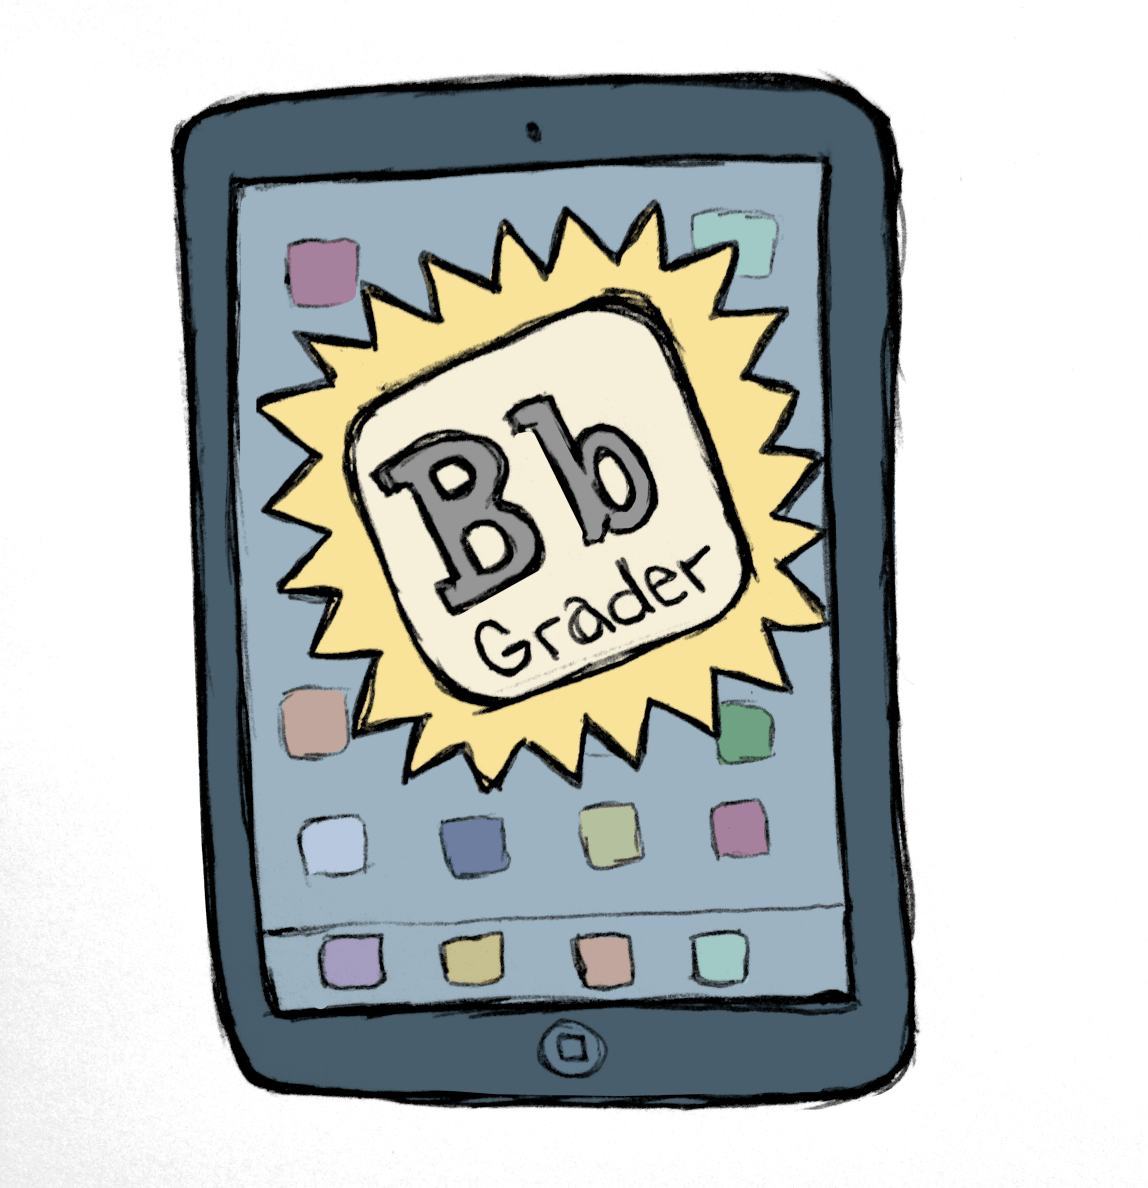 Introducing the new myWPI BB Grader App for iPad